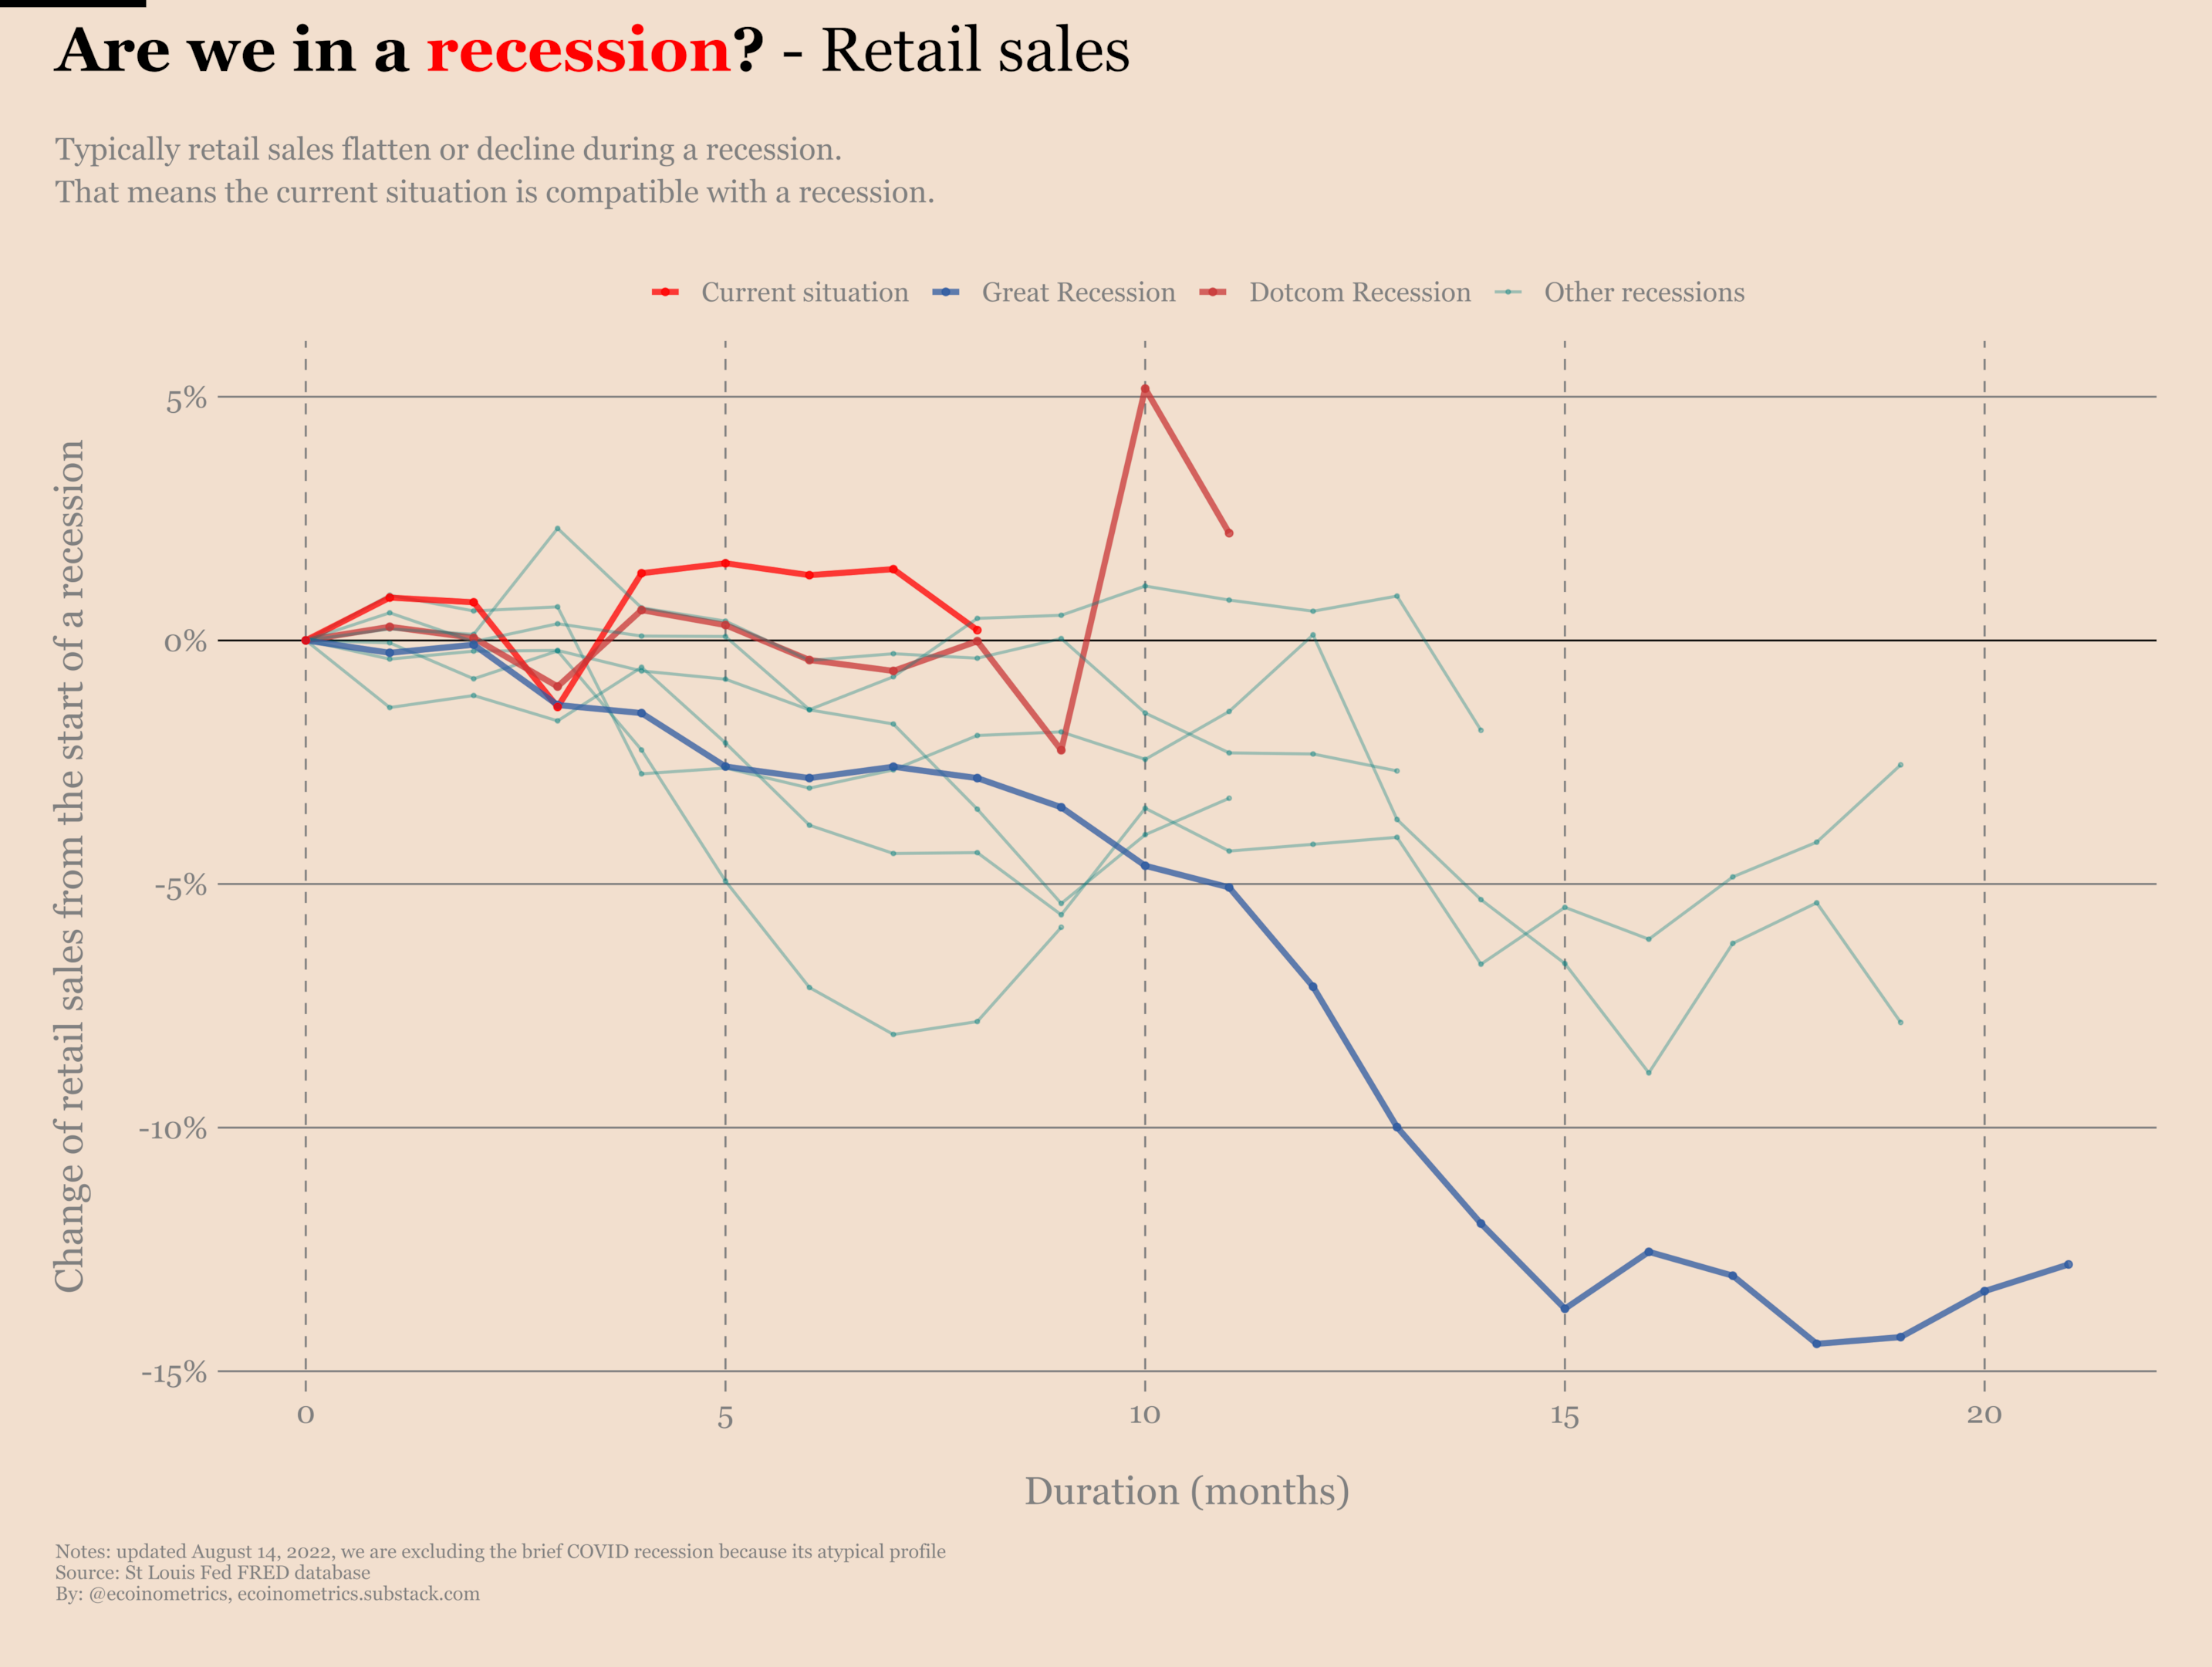 Comparing the evolution of retail sales to past recessions.